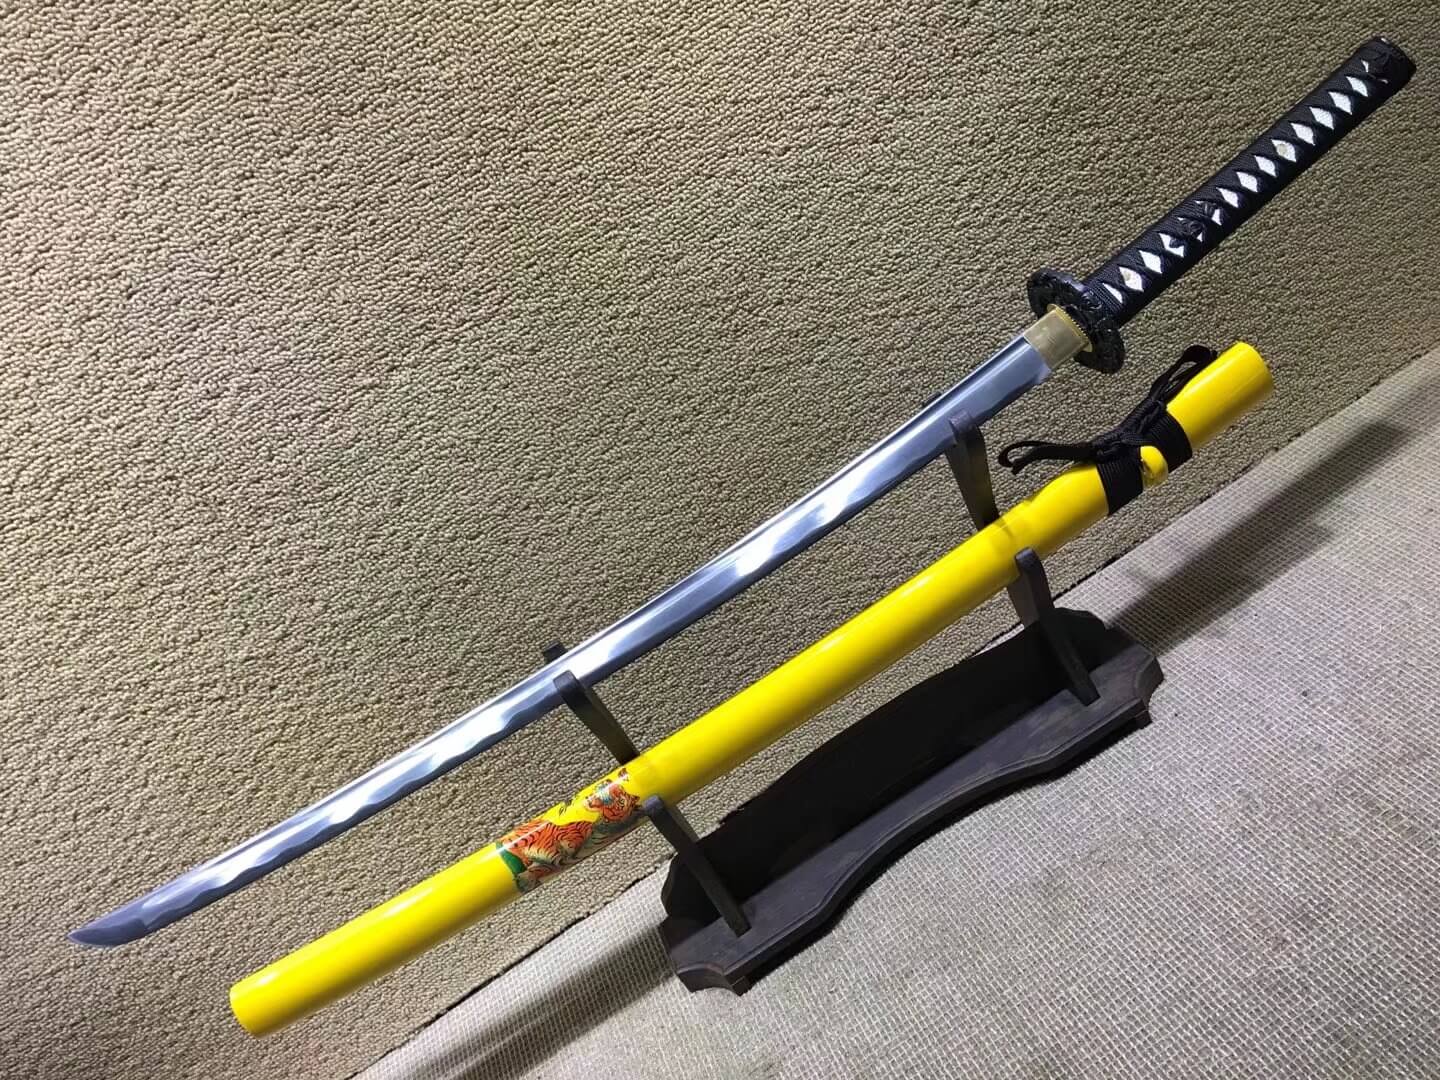 Tiger samurai swords,Medium carbon steel bade,Yellow scabbard,Alloy fitteds - Chinese sword shop